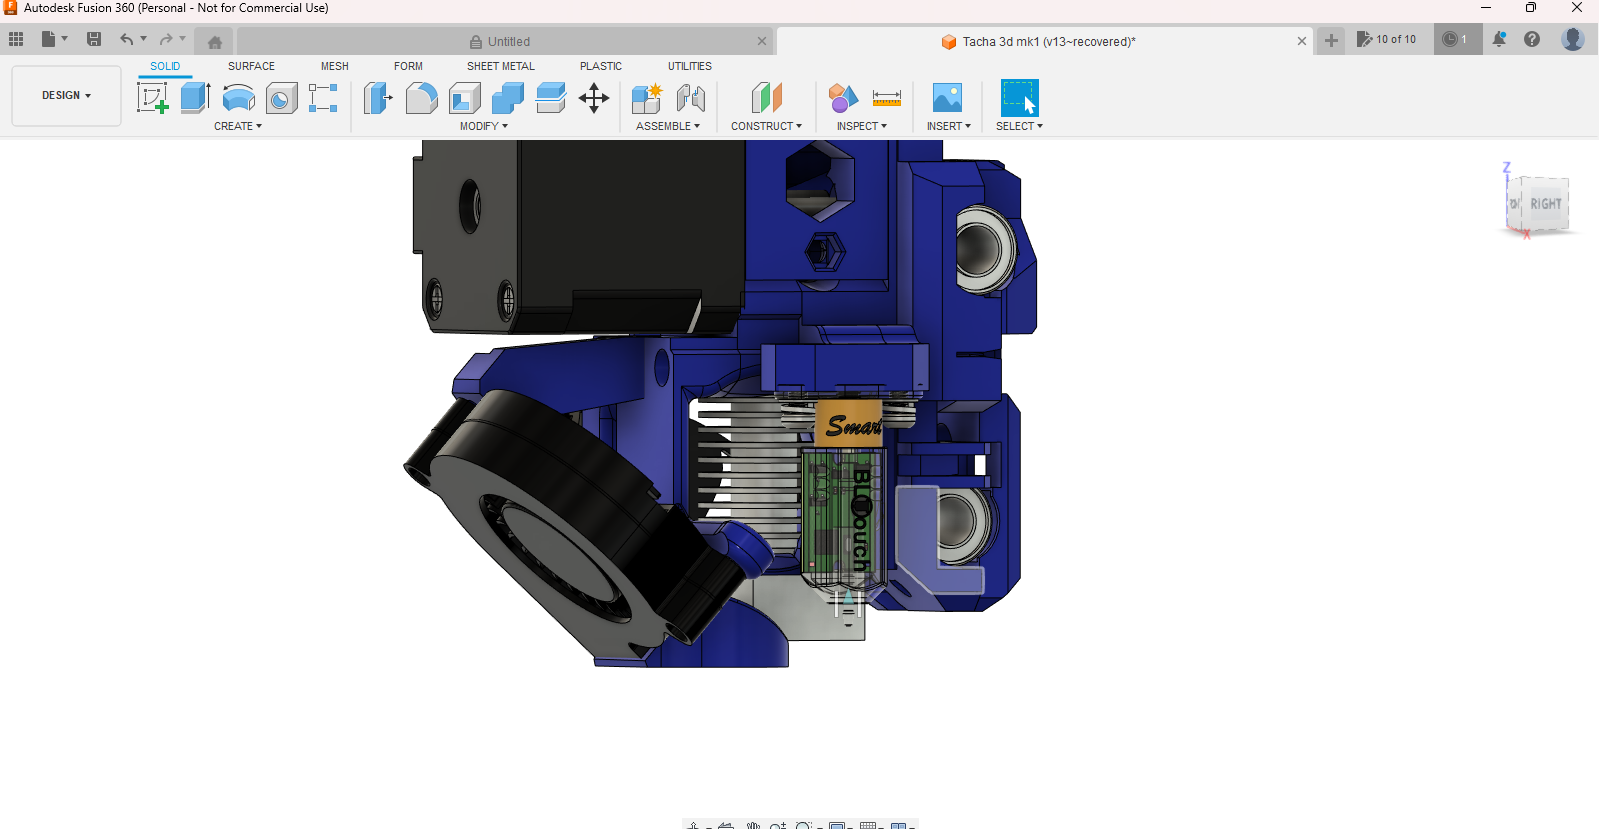 Autodesk Fusion 360 (Personal - Not for Commercial Use) 6_29_2023 10_14_56 PM.png